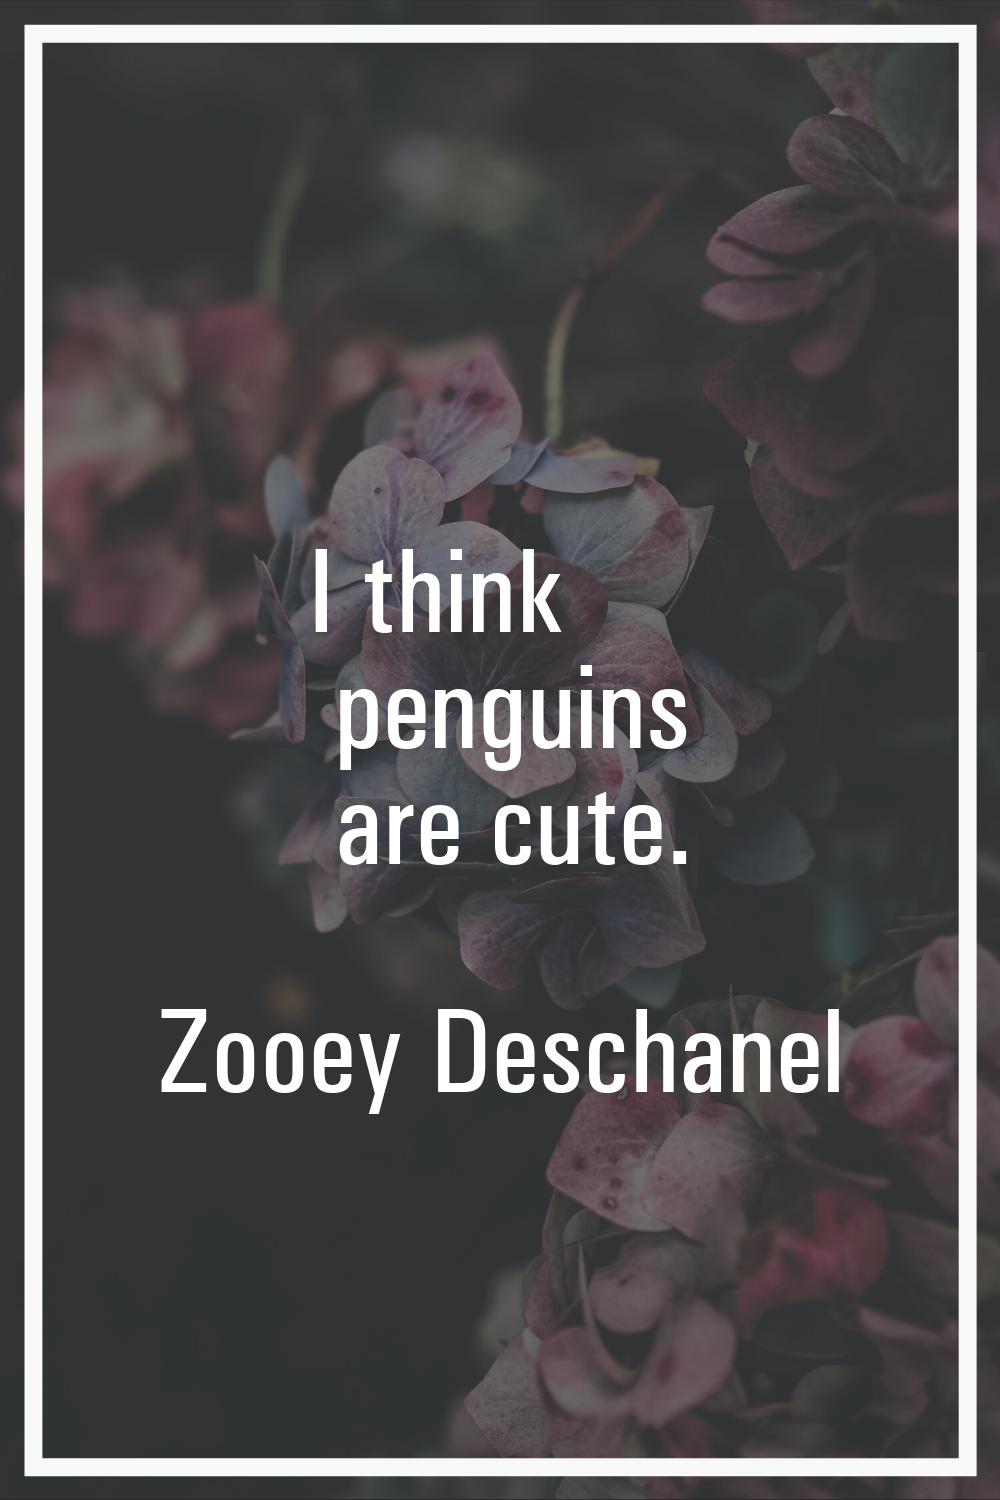 I think penguins are cute.